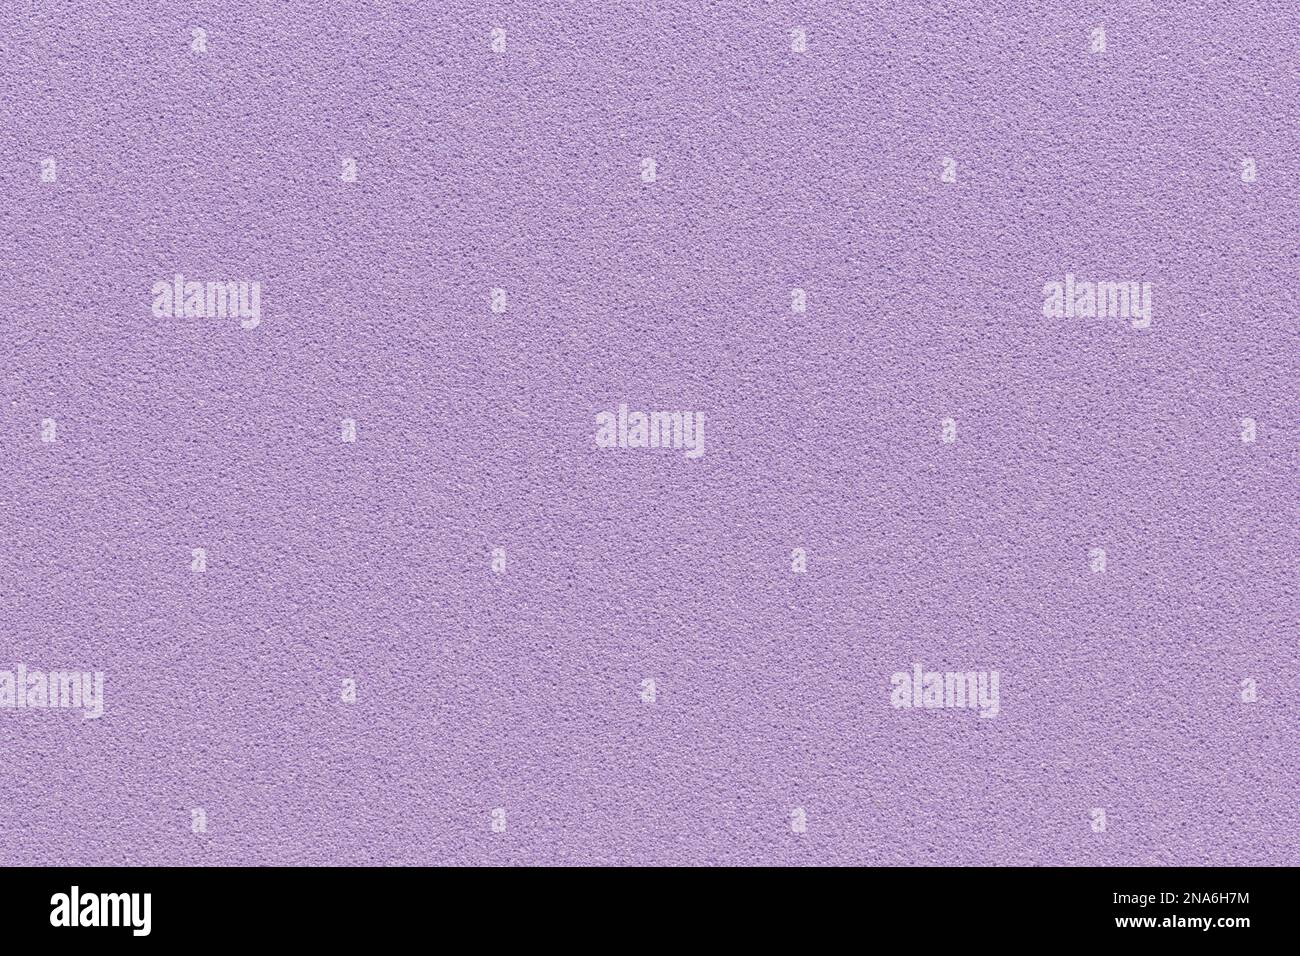 Purple lavender solid background color. Porous textured blank surface with copy space. Stock Photo